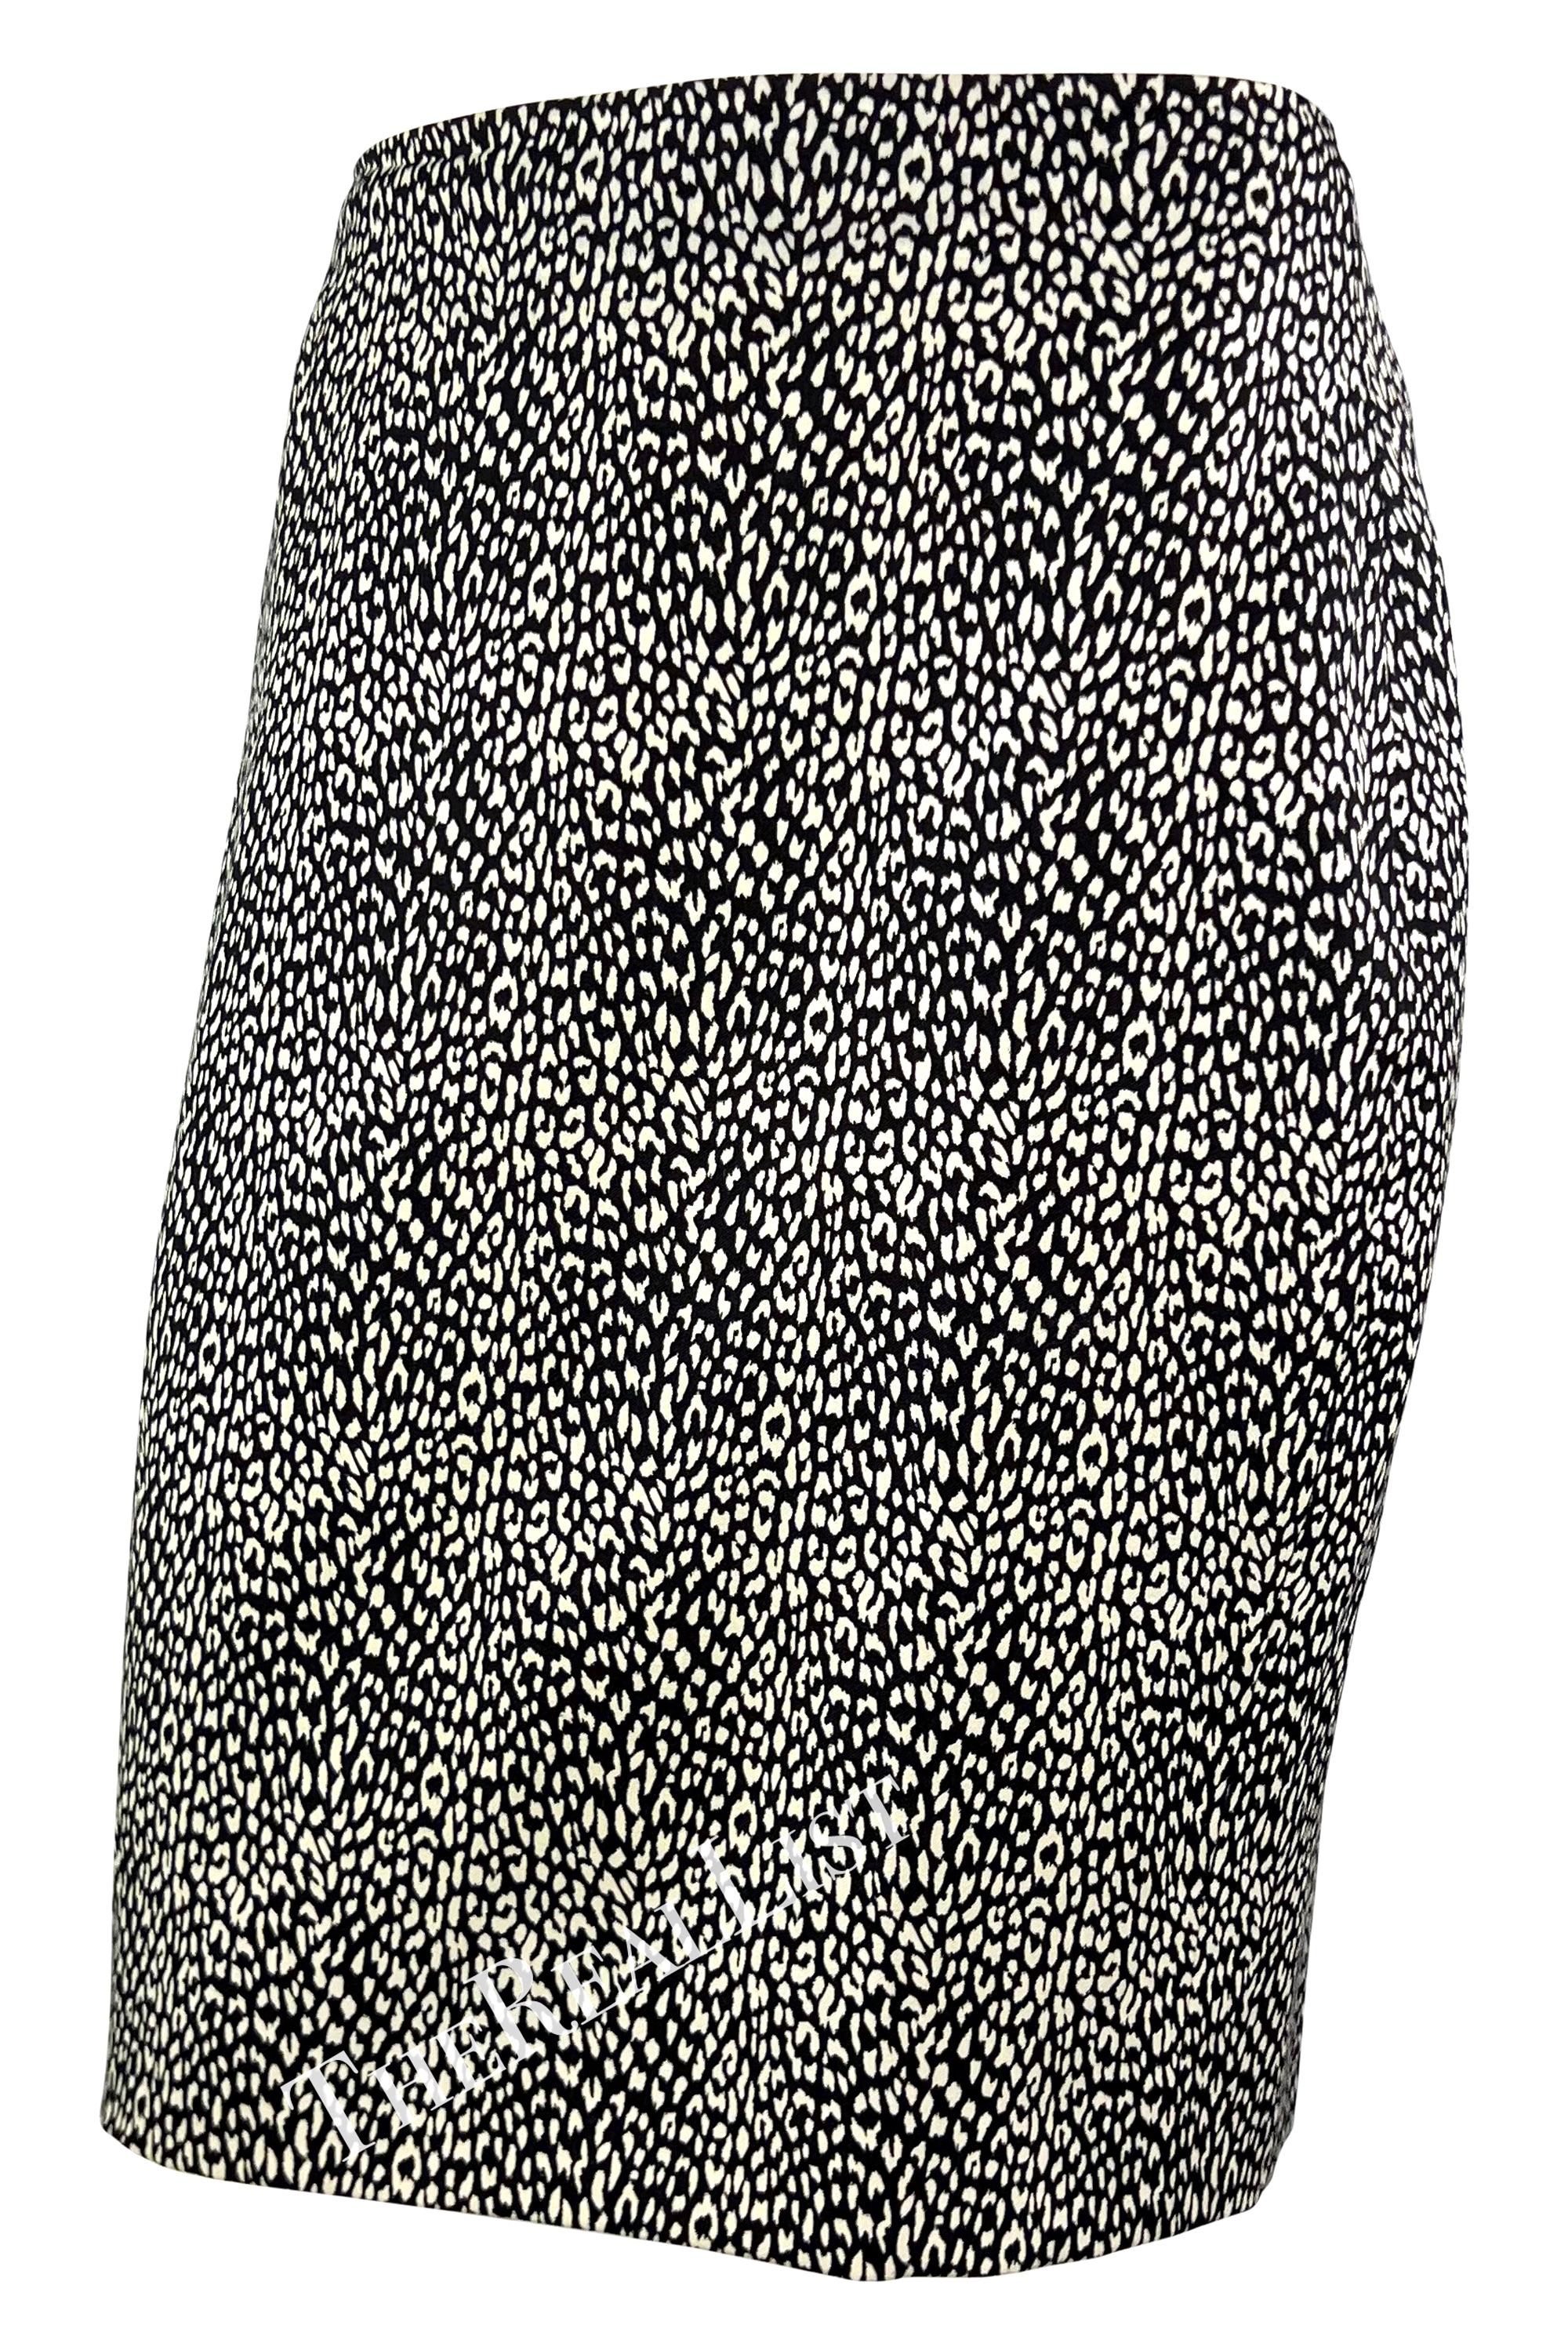 Presenting a fabulous black and white cheetah print Gianni Versace skirt, designed by Gianni Versace. From the Fall/Winter 1996 collection, this above-the-knee skirt is the perfect versatile designer addition to any wardrobe.

Approximate